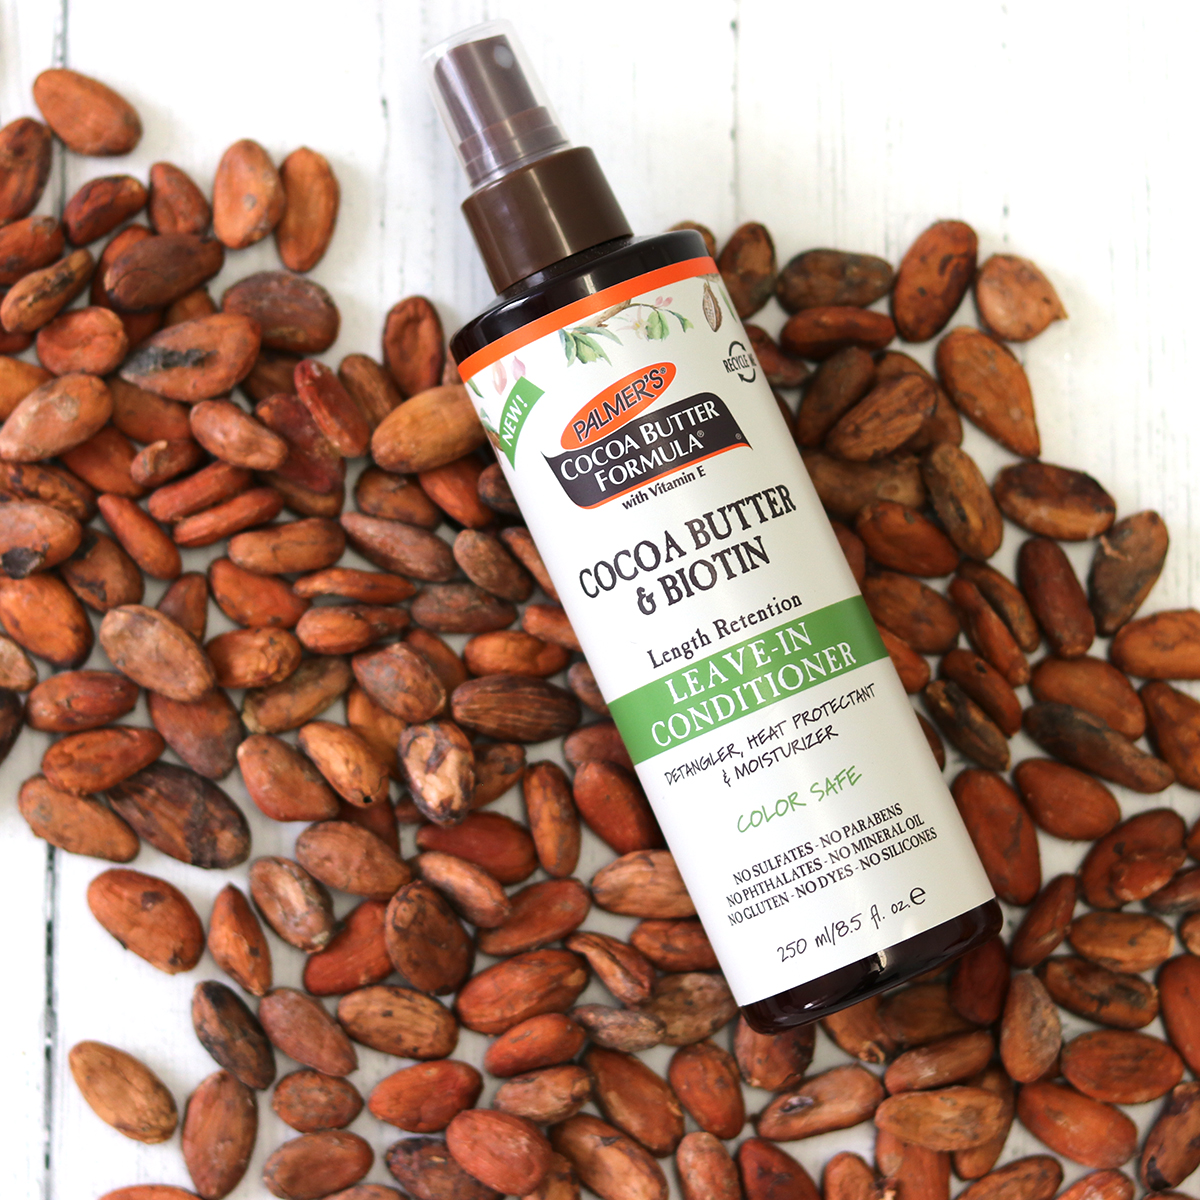 Palmer's Cocoa Butter & Biotin Leave-In Conditioner for Winter Hair Care